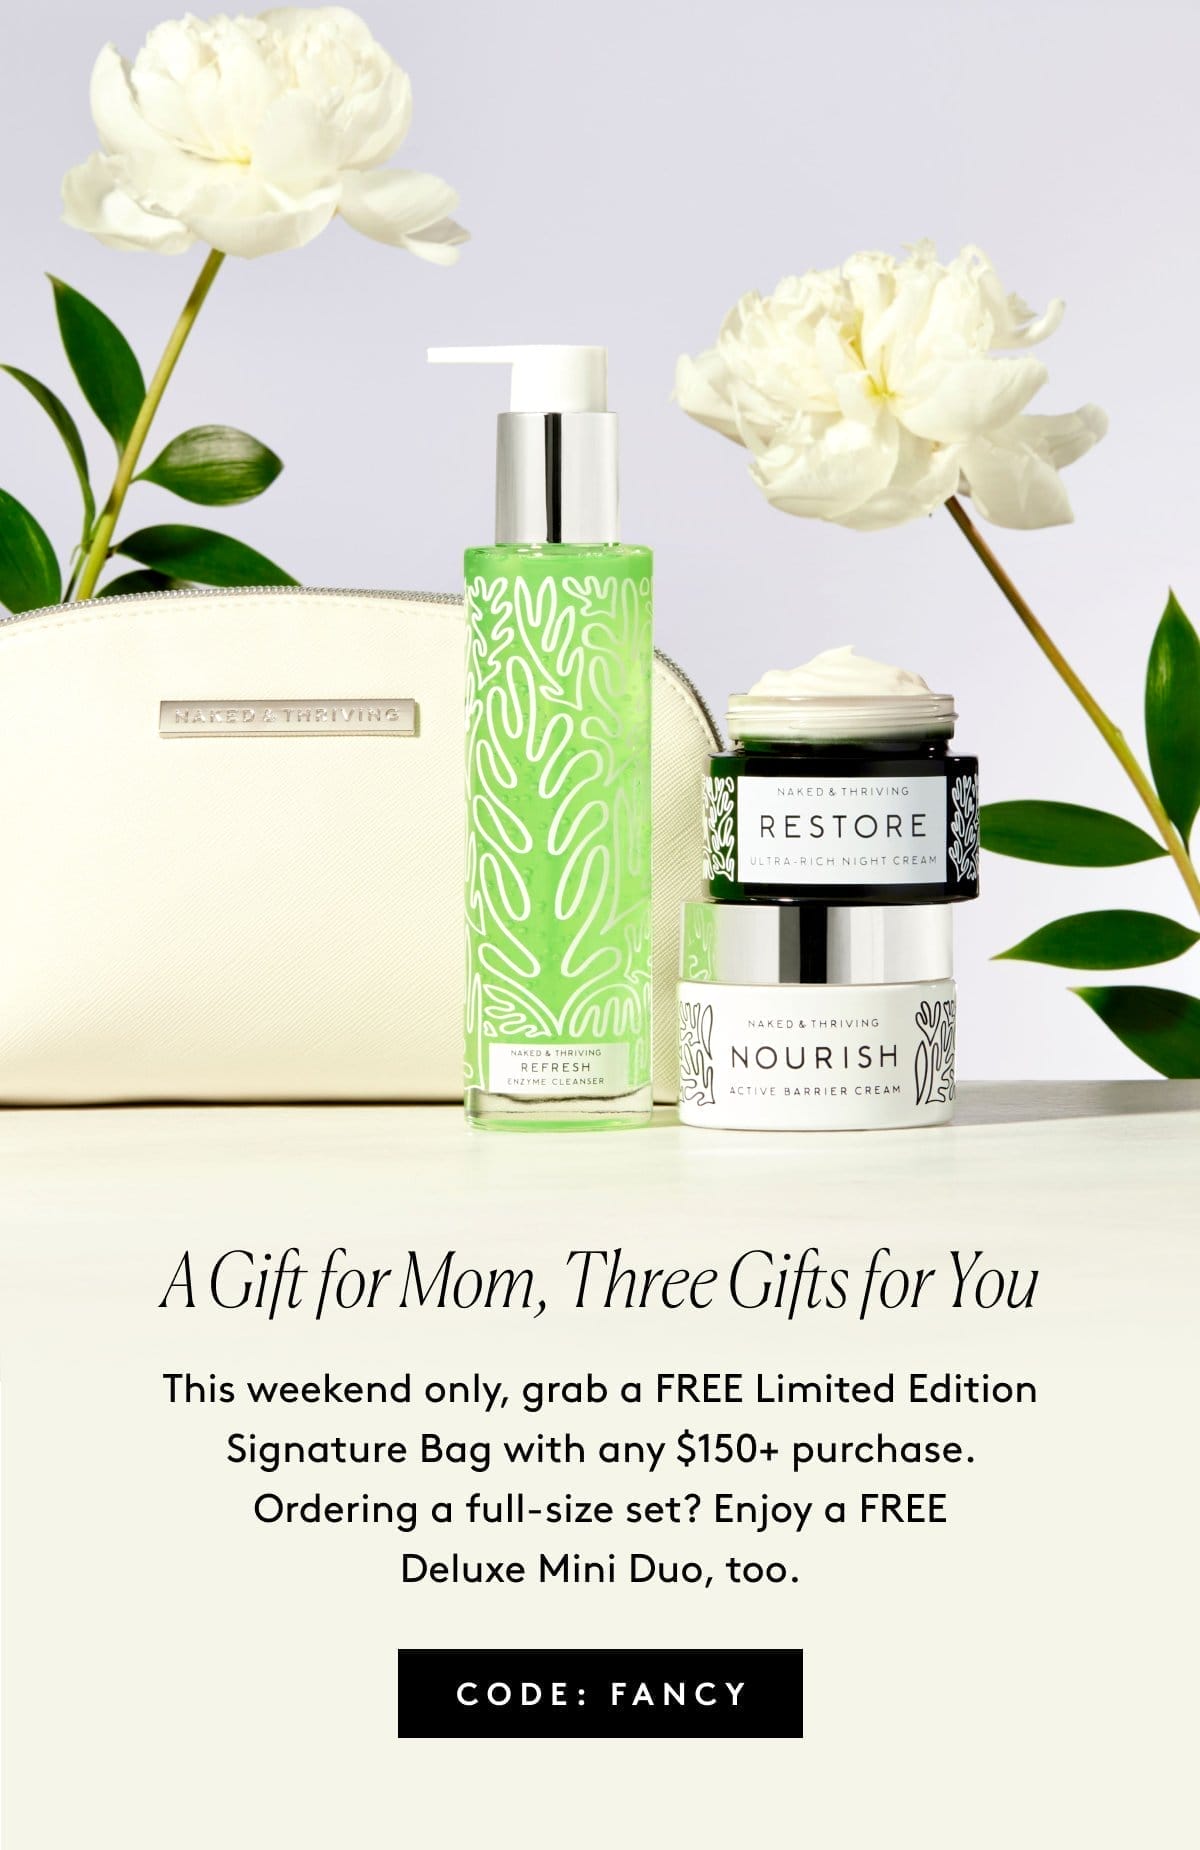 A Gift for Mom, Three Gifts for You